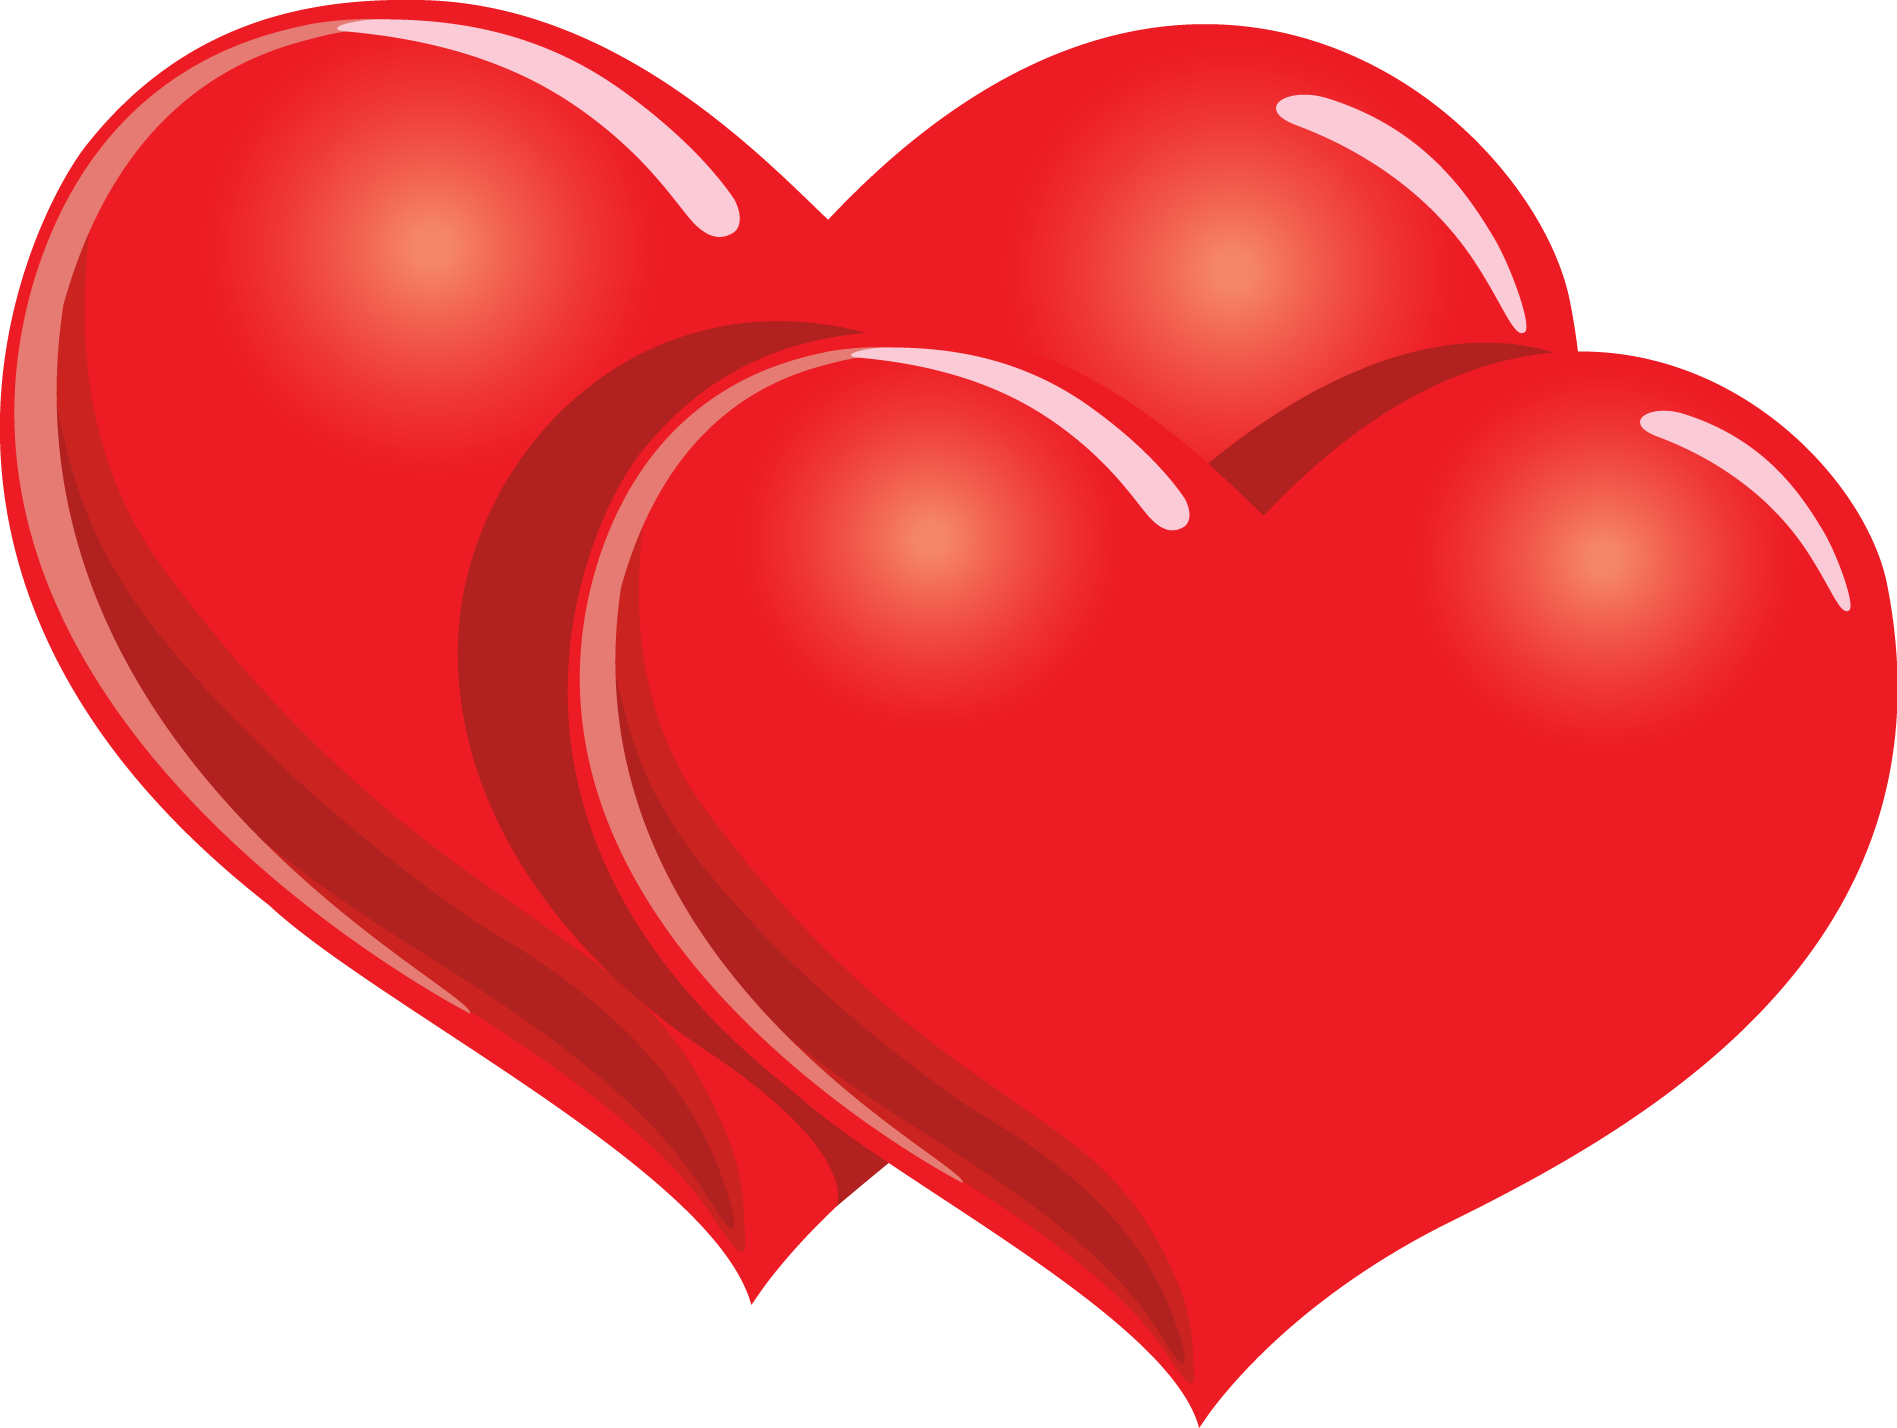 Two Hearts Clipart | Clipart library - Free Clipart Images